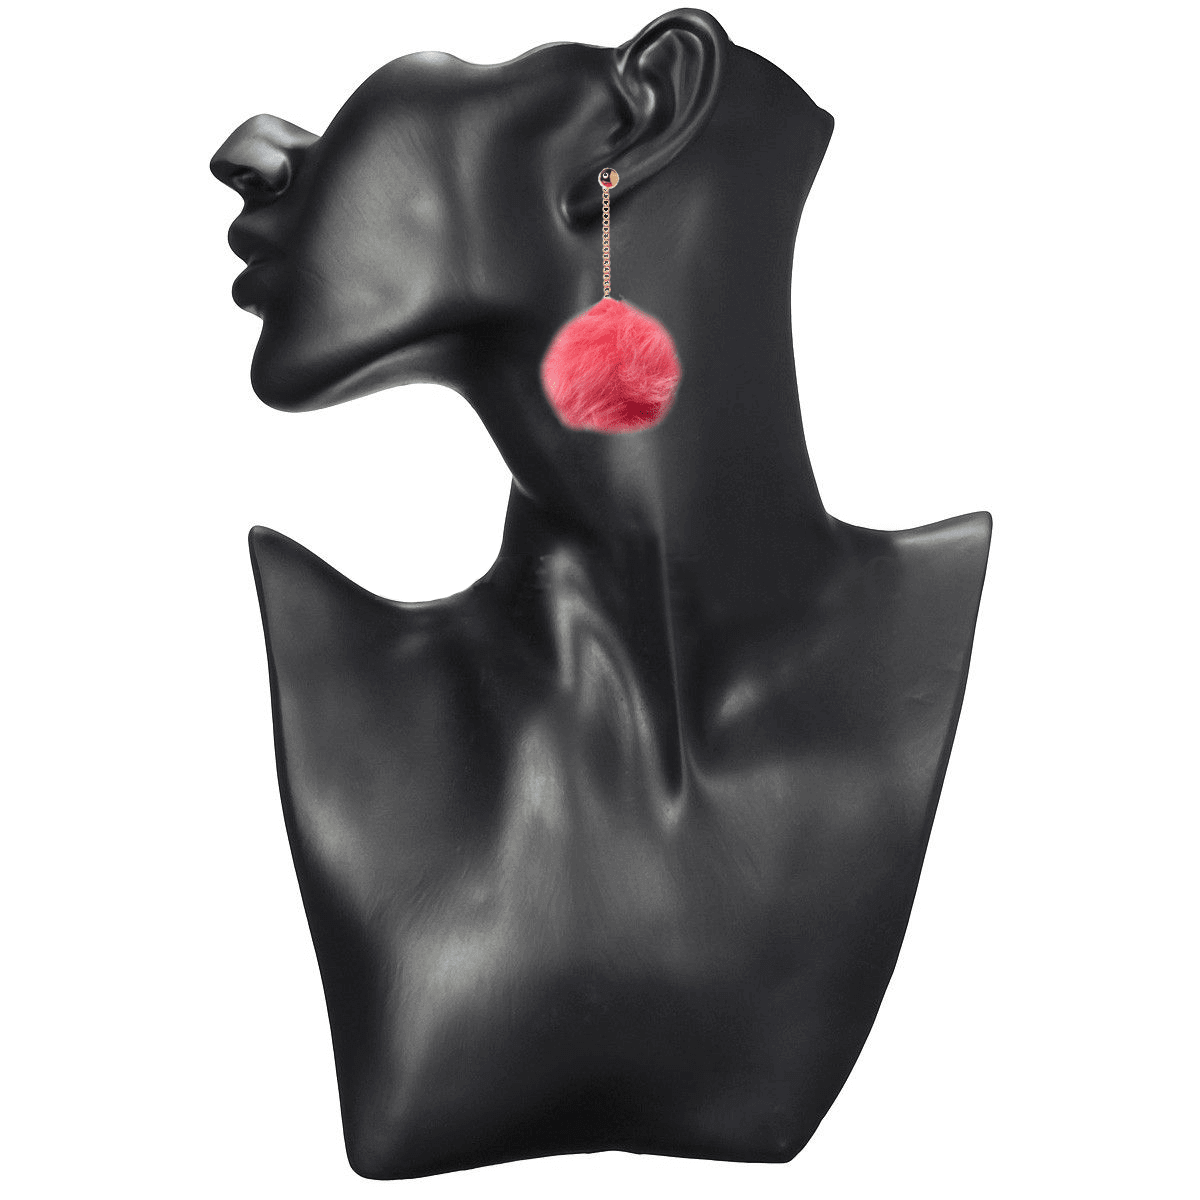 3 Pack Pom Pom Earrings Set with 3 inch Gold Dangle Chain - Black, White and Coral Earrings Set by Expression Tees